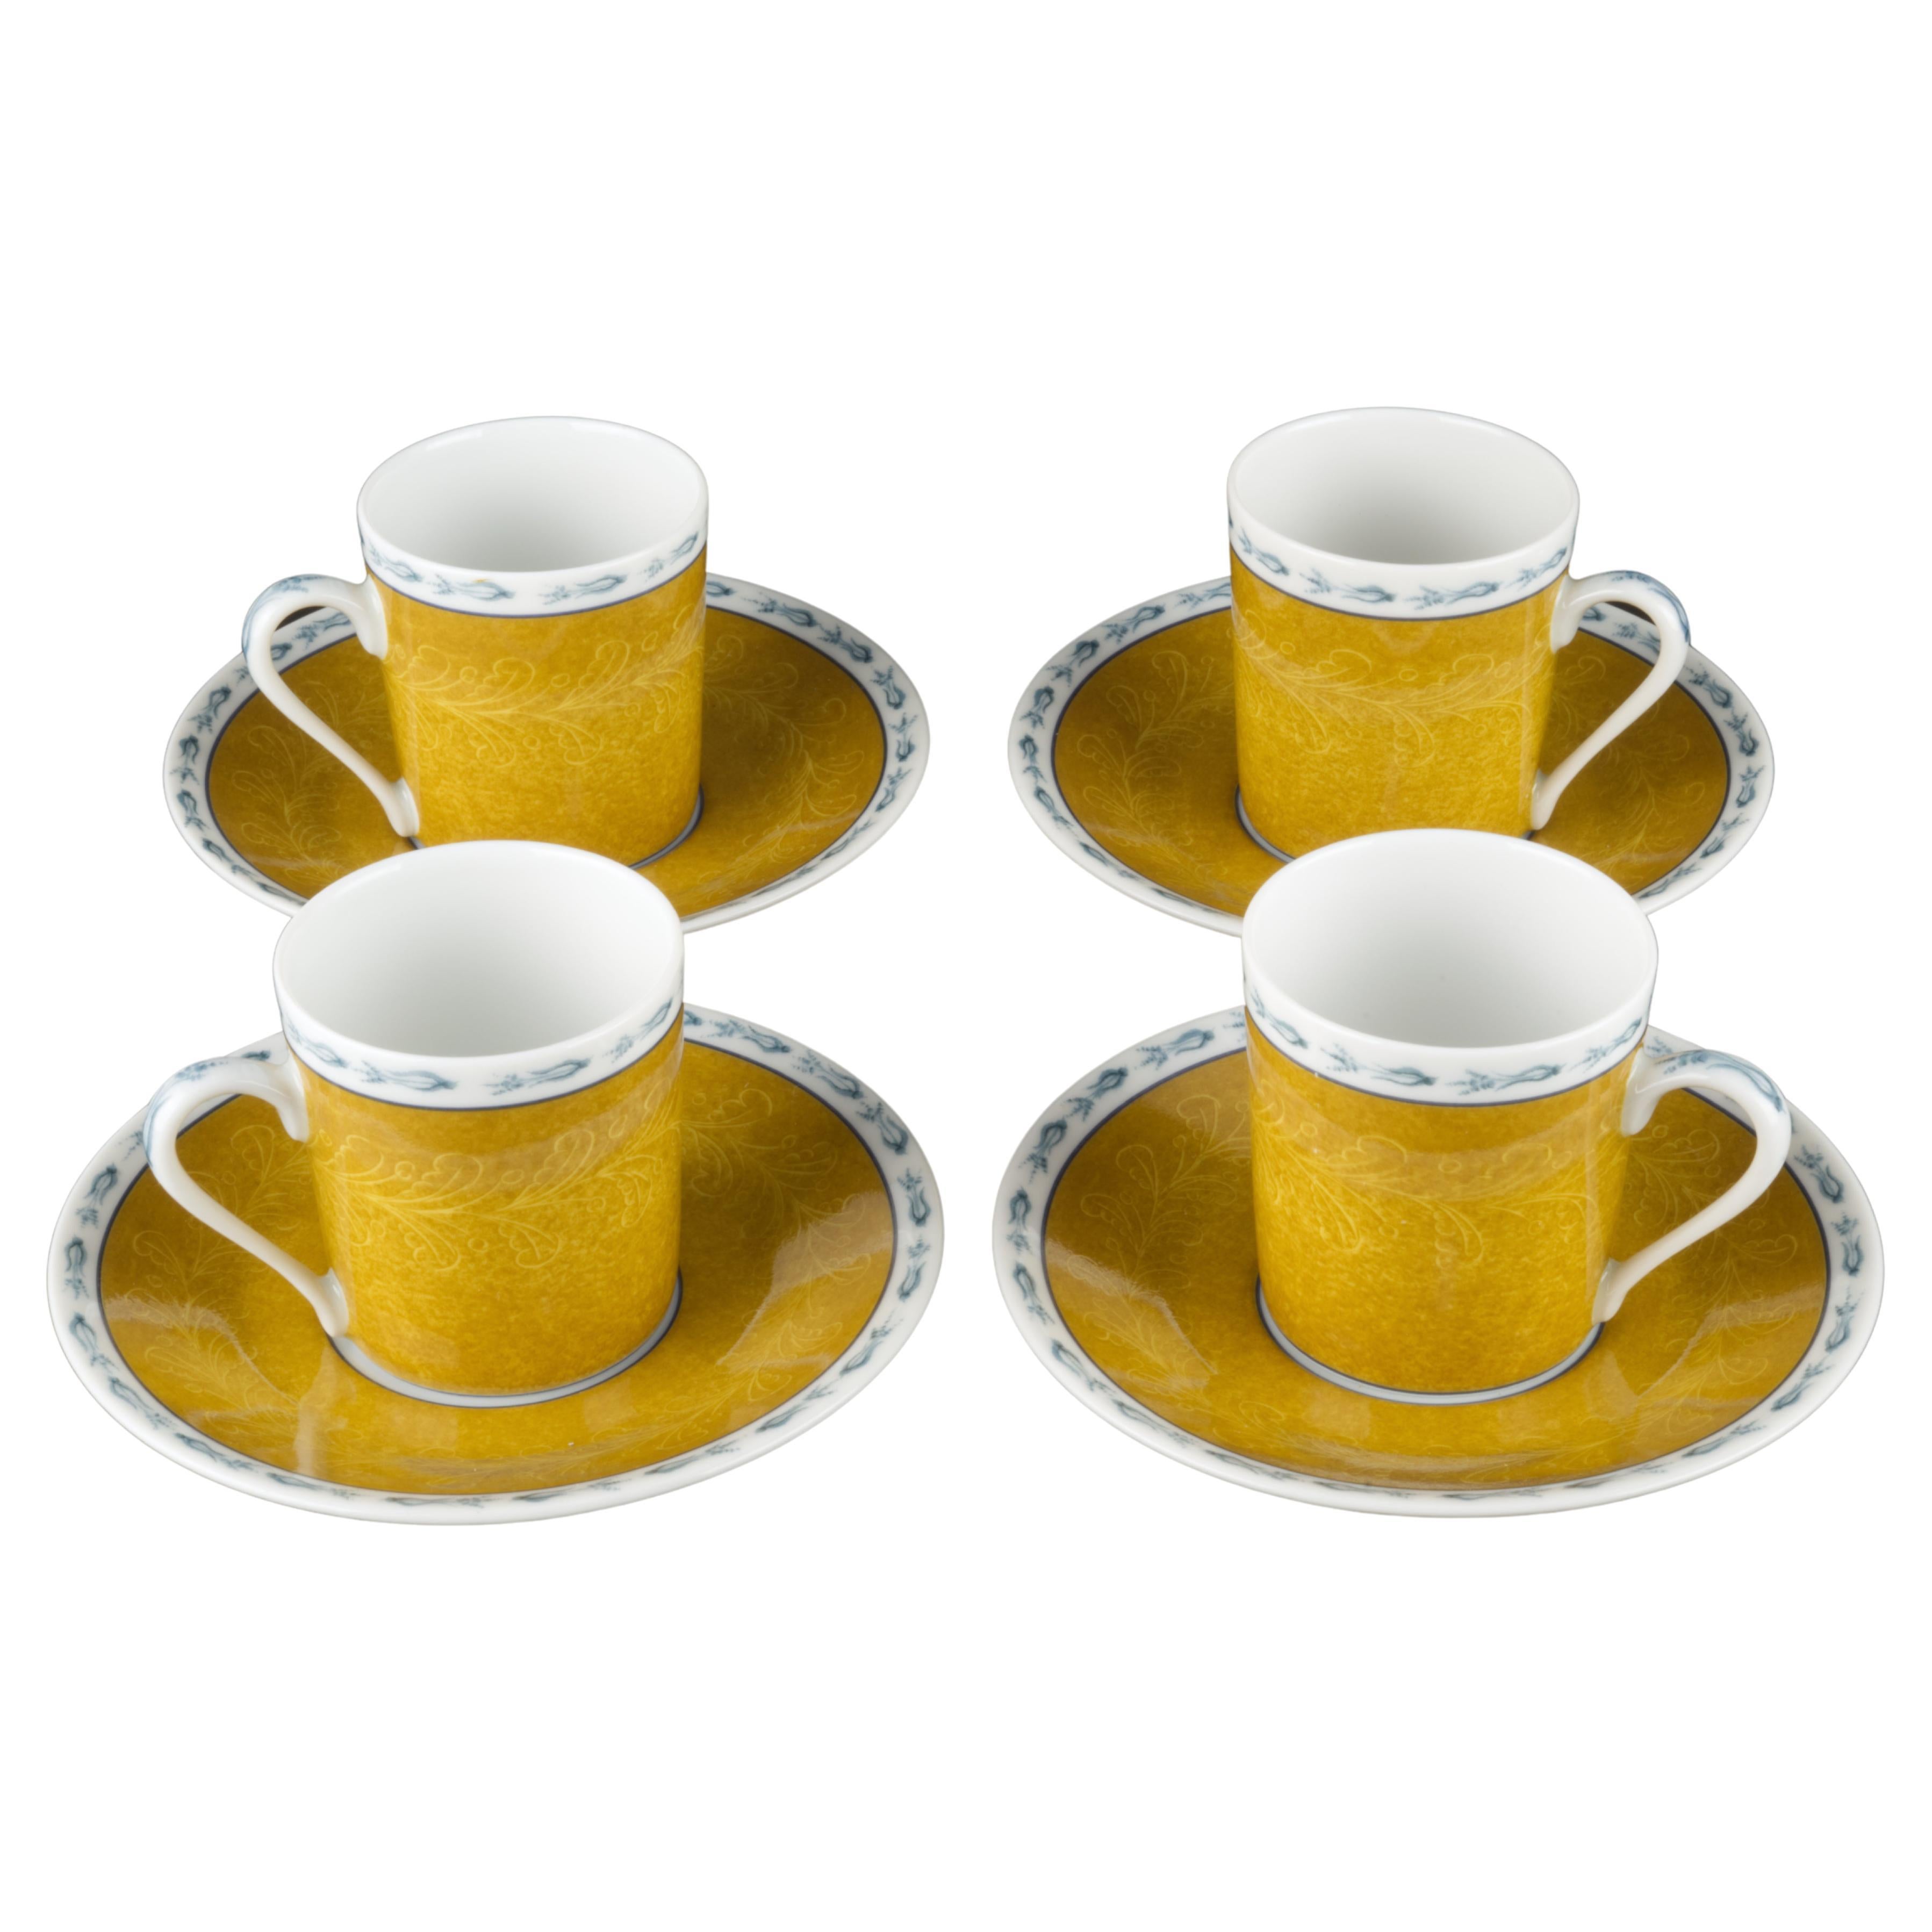 What is traditionally served in a demitasse cup?